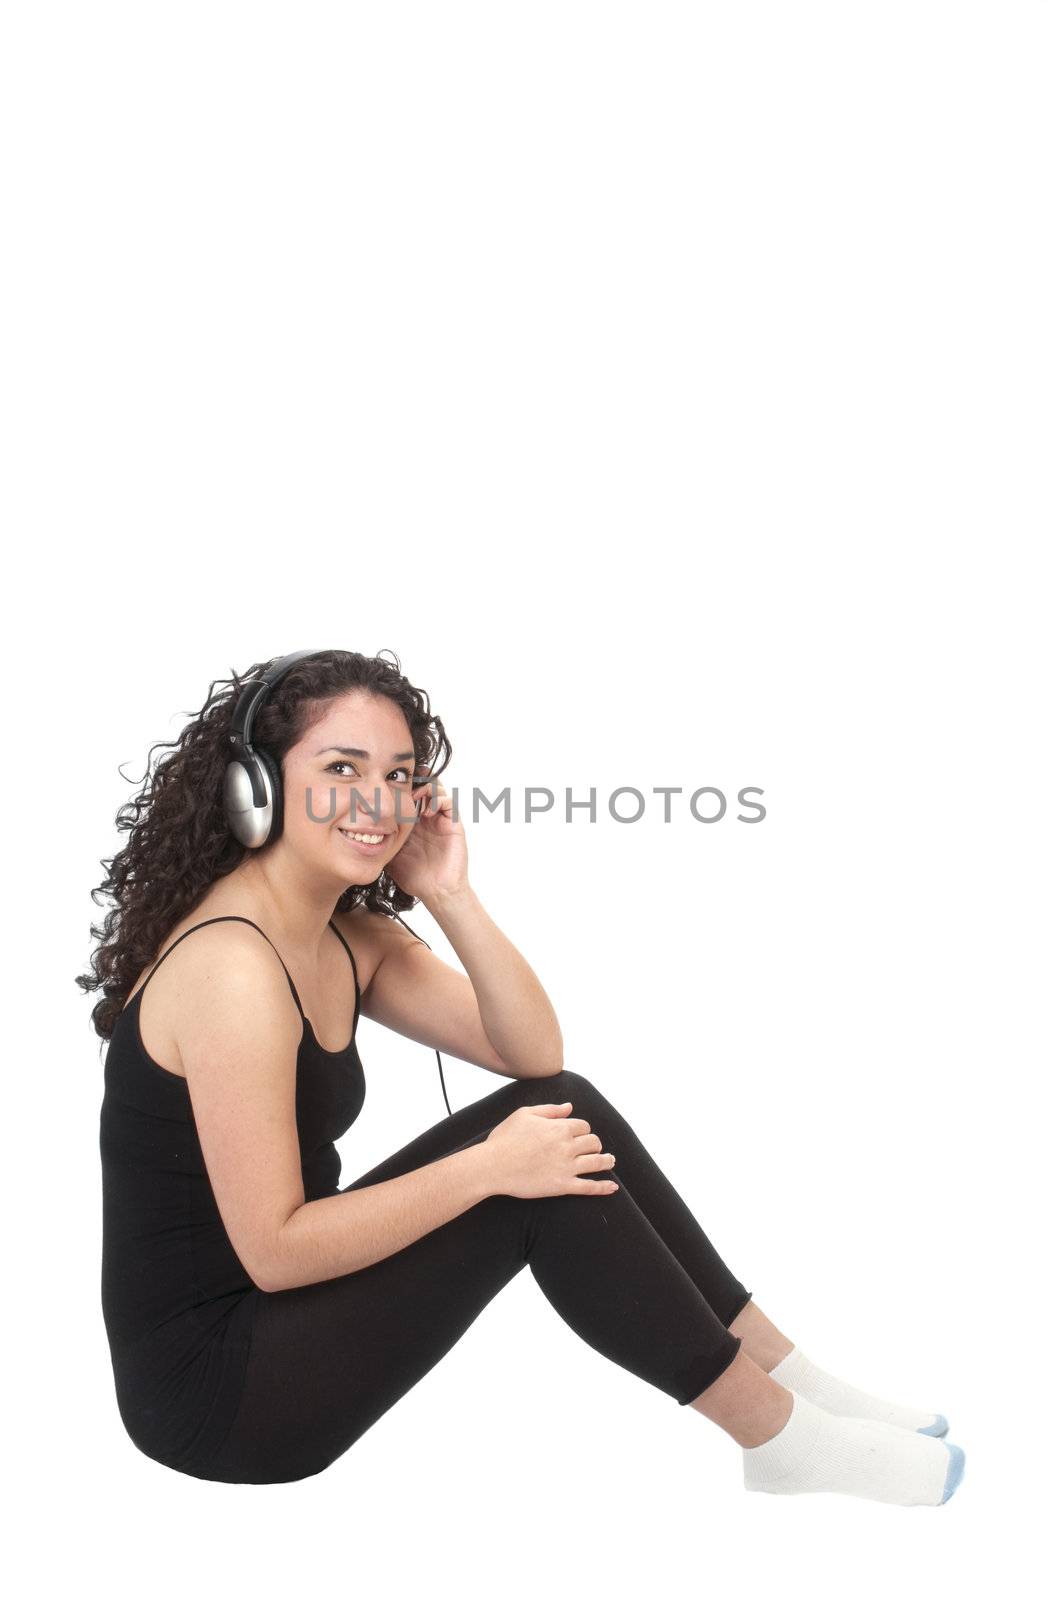 cute hispanic girl in a black leotard, smiling while listening to music on headphones